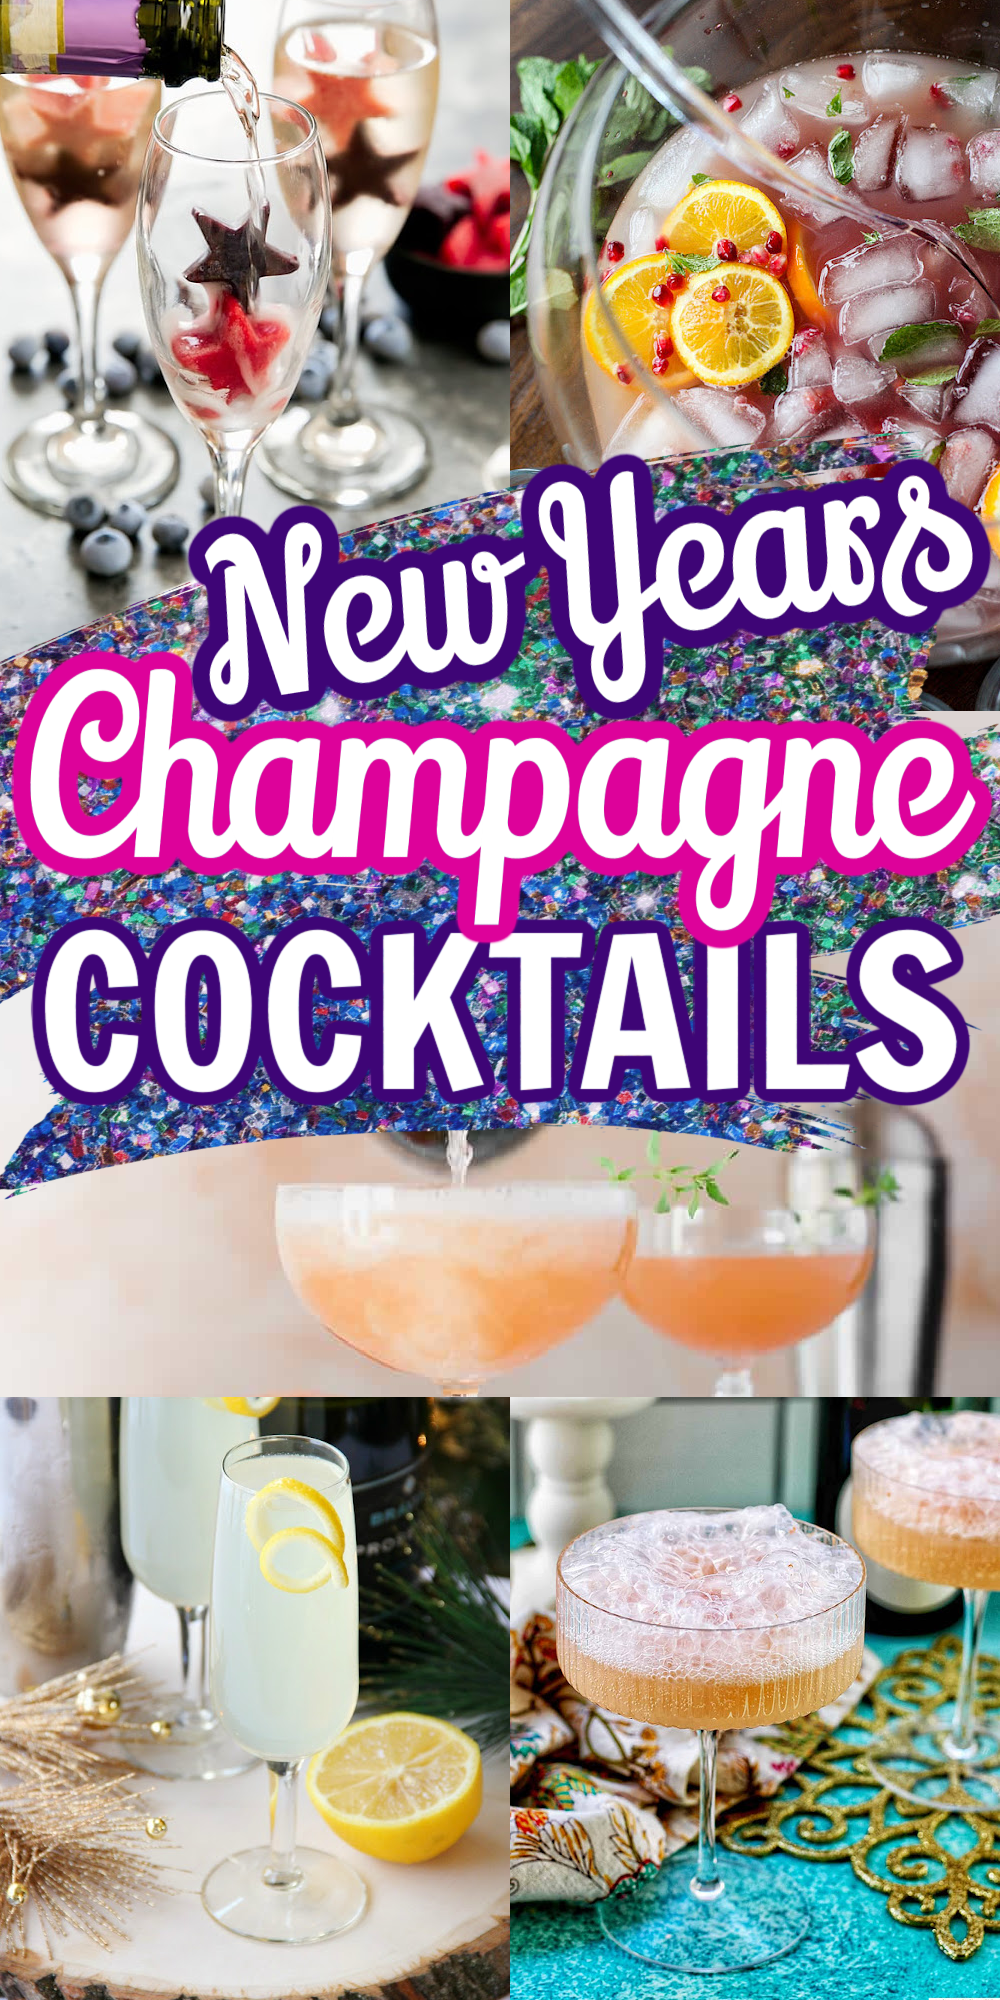 20 Champagne Cocktails to Celebrate New Year’s